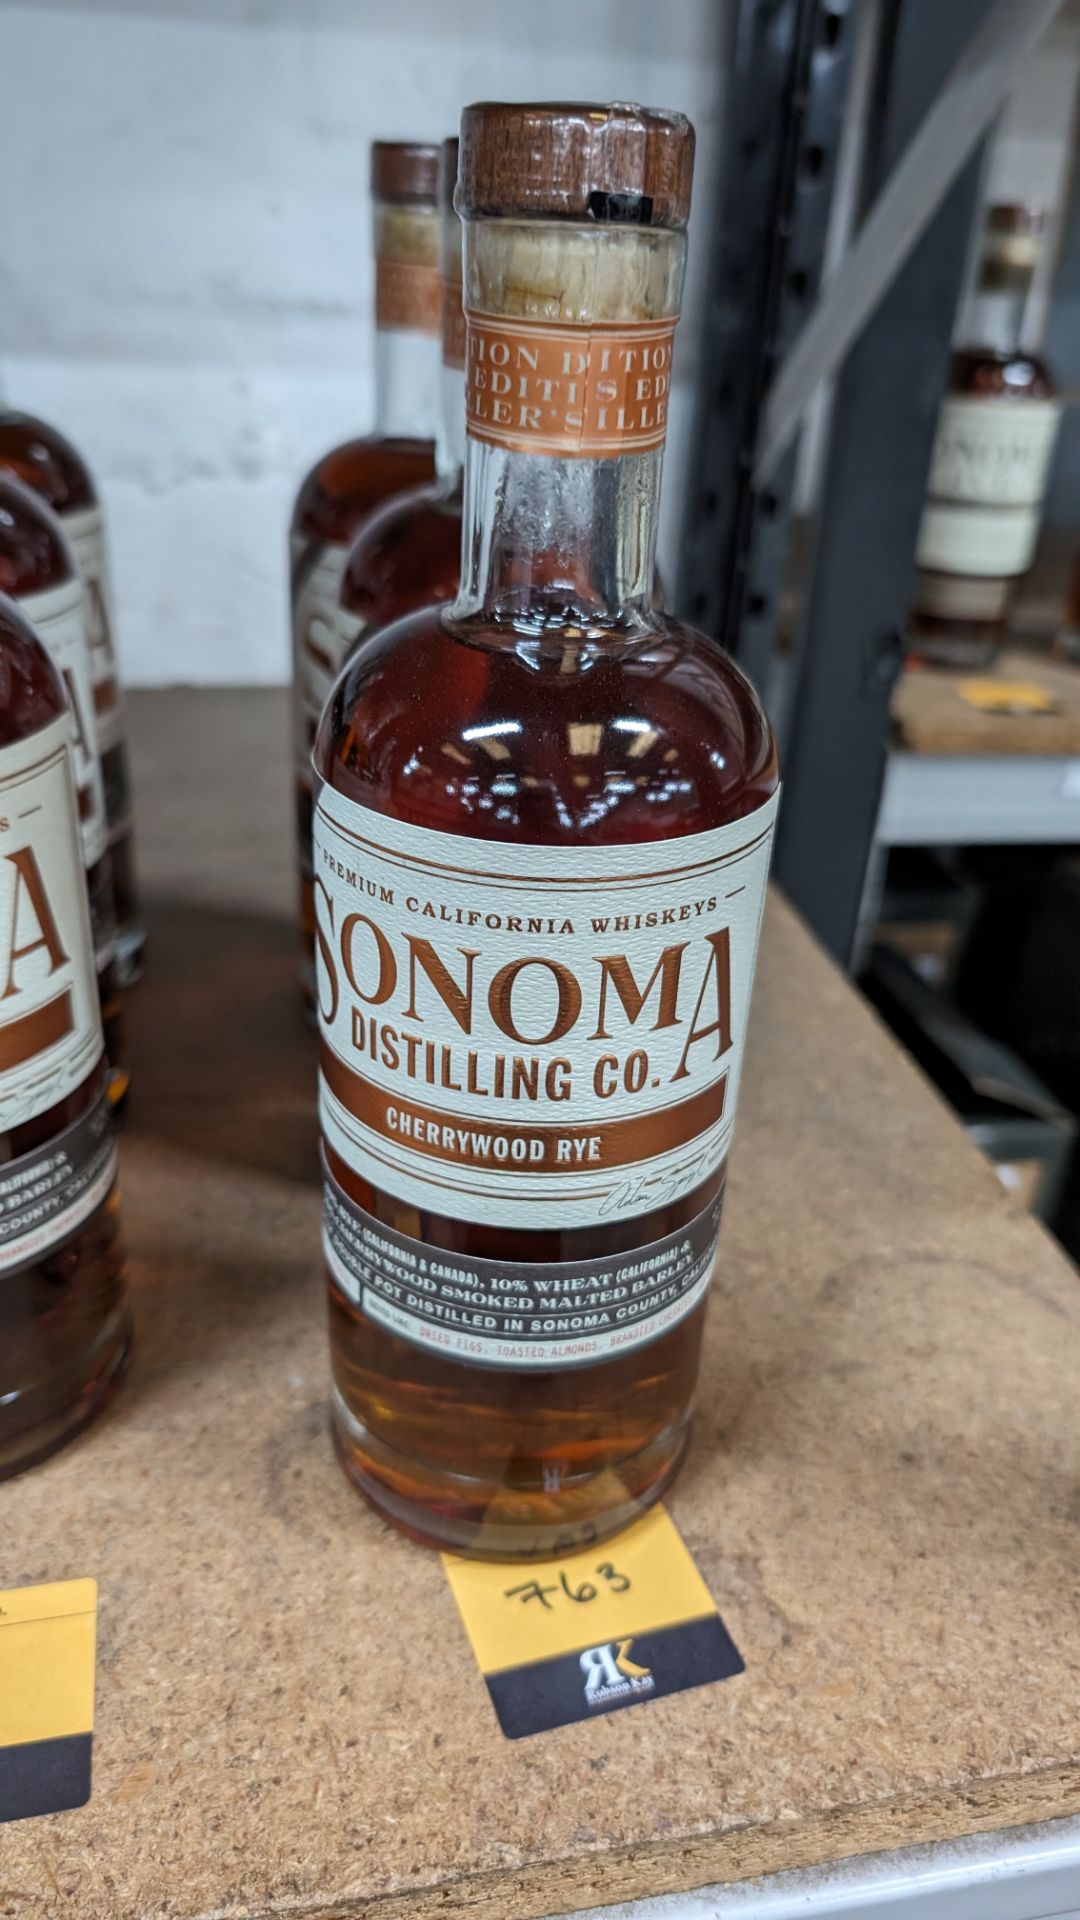 3 off 700ml bottles of Sonoma Cherrywood Rye Whiskey. 47.8% alc/vol (95.6 proof). Distilled and bo - Image 6 of 6